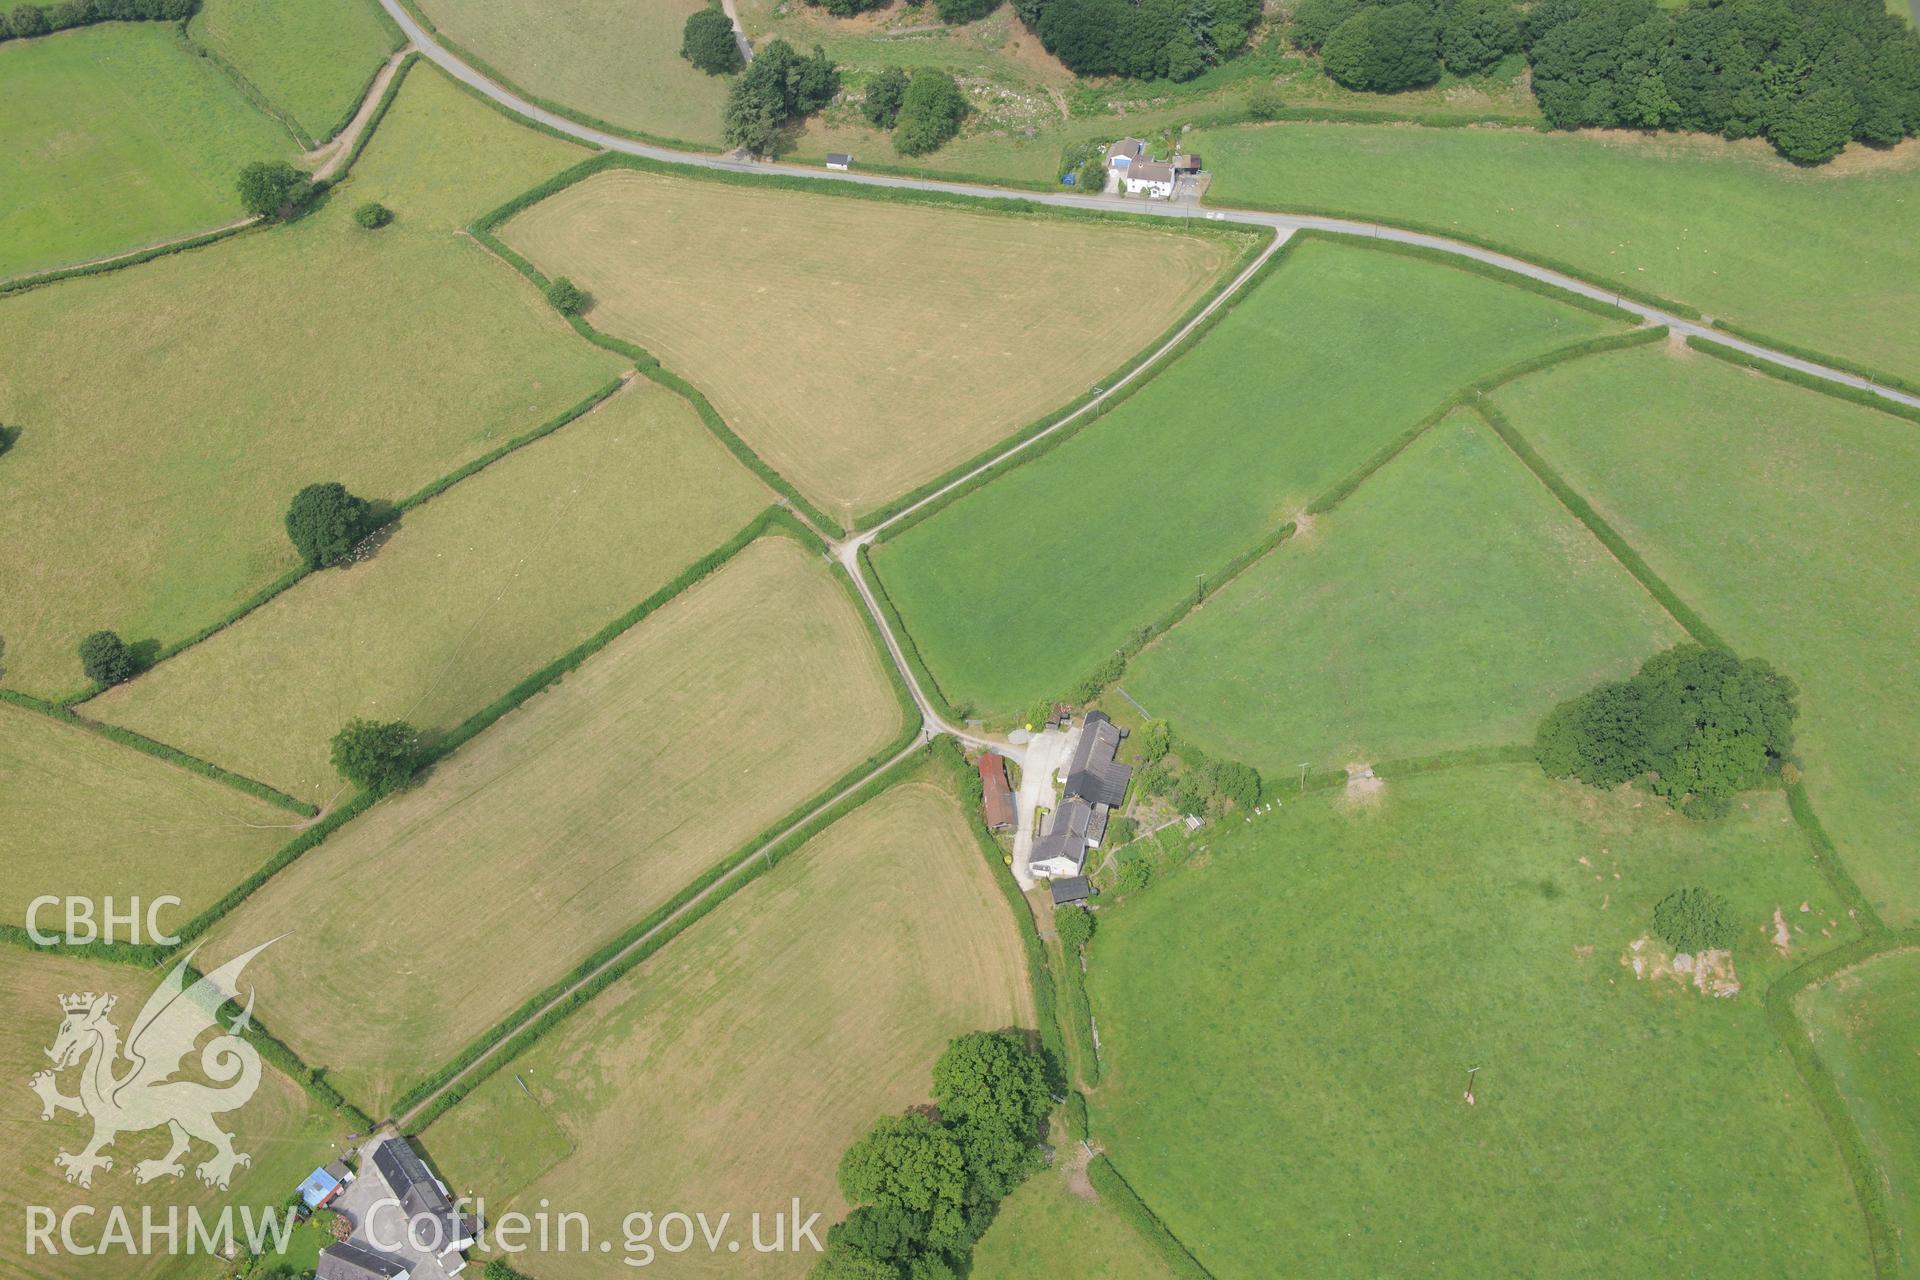 Royal Commission aerial photography of Llys Brychan Roman villa taken during drought conditions on 22nd July 2013.